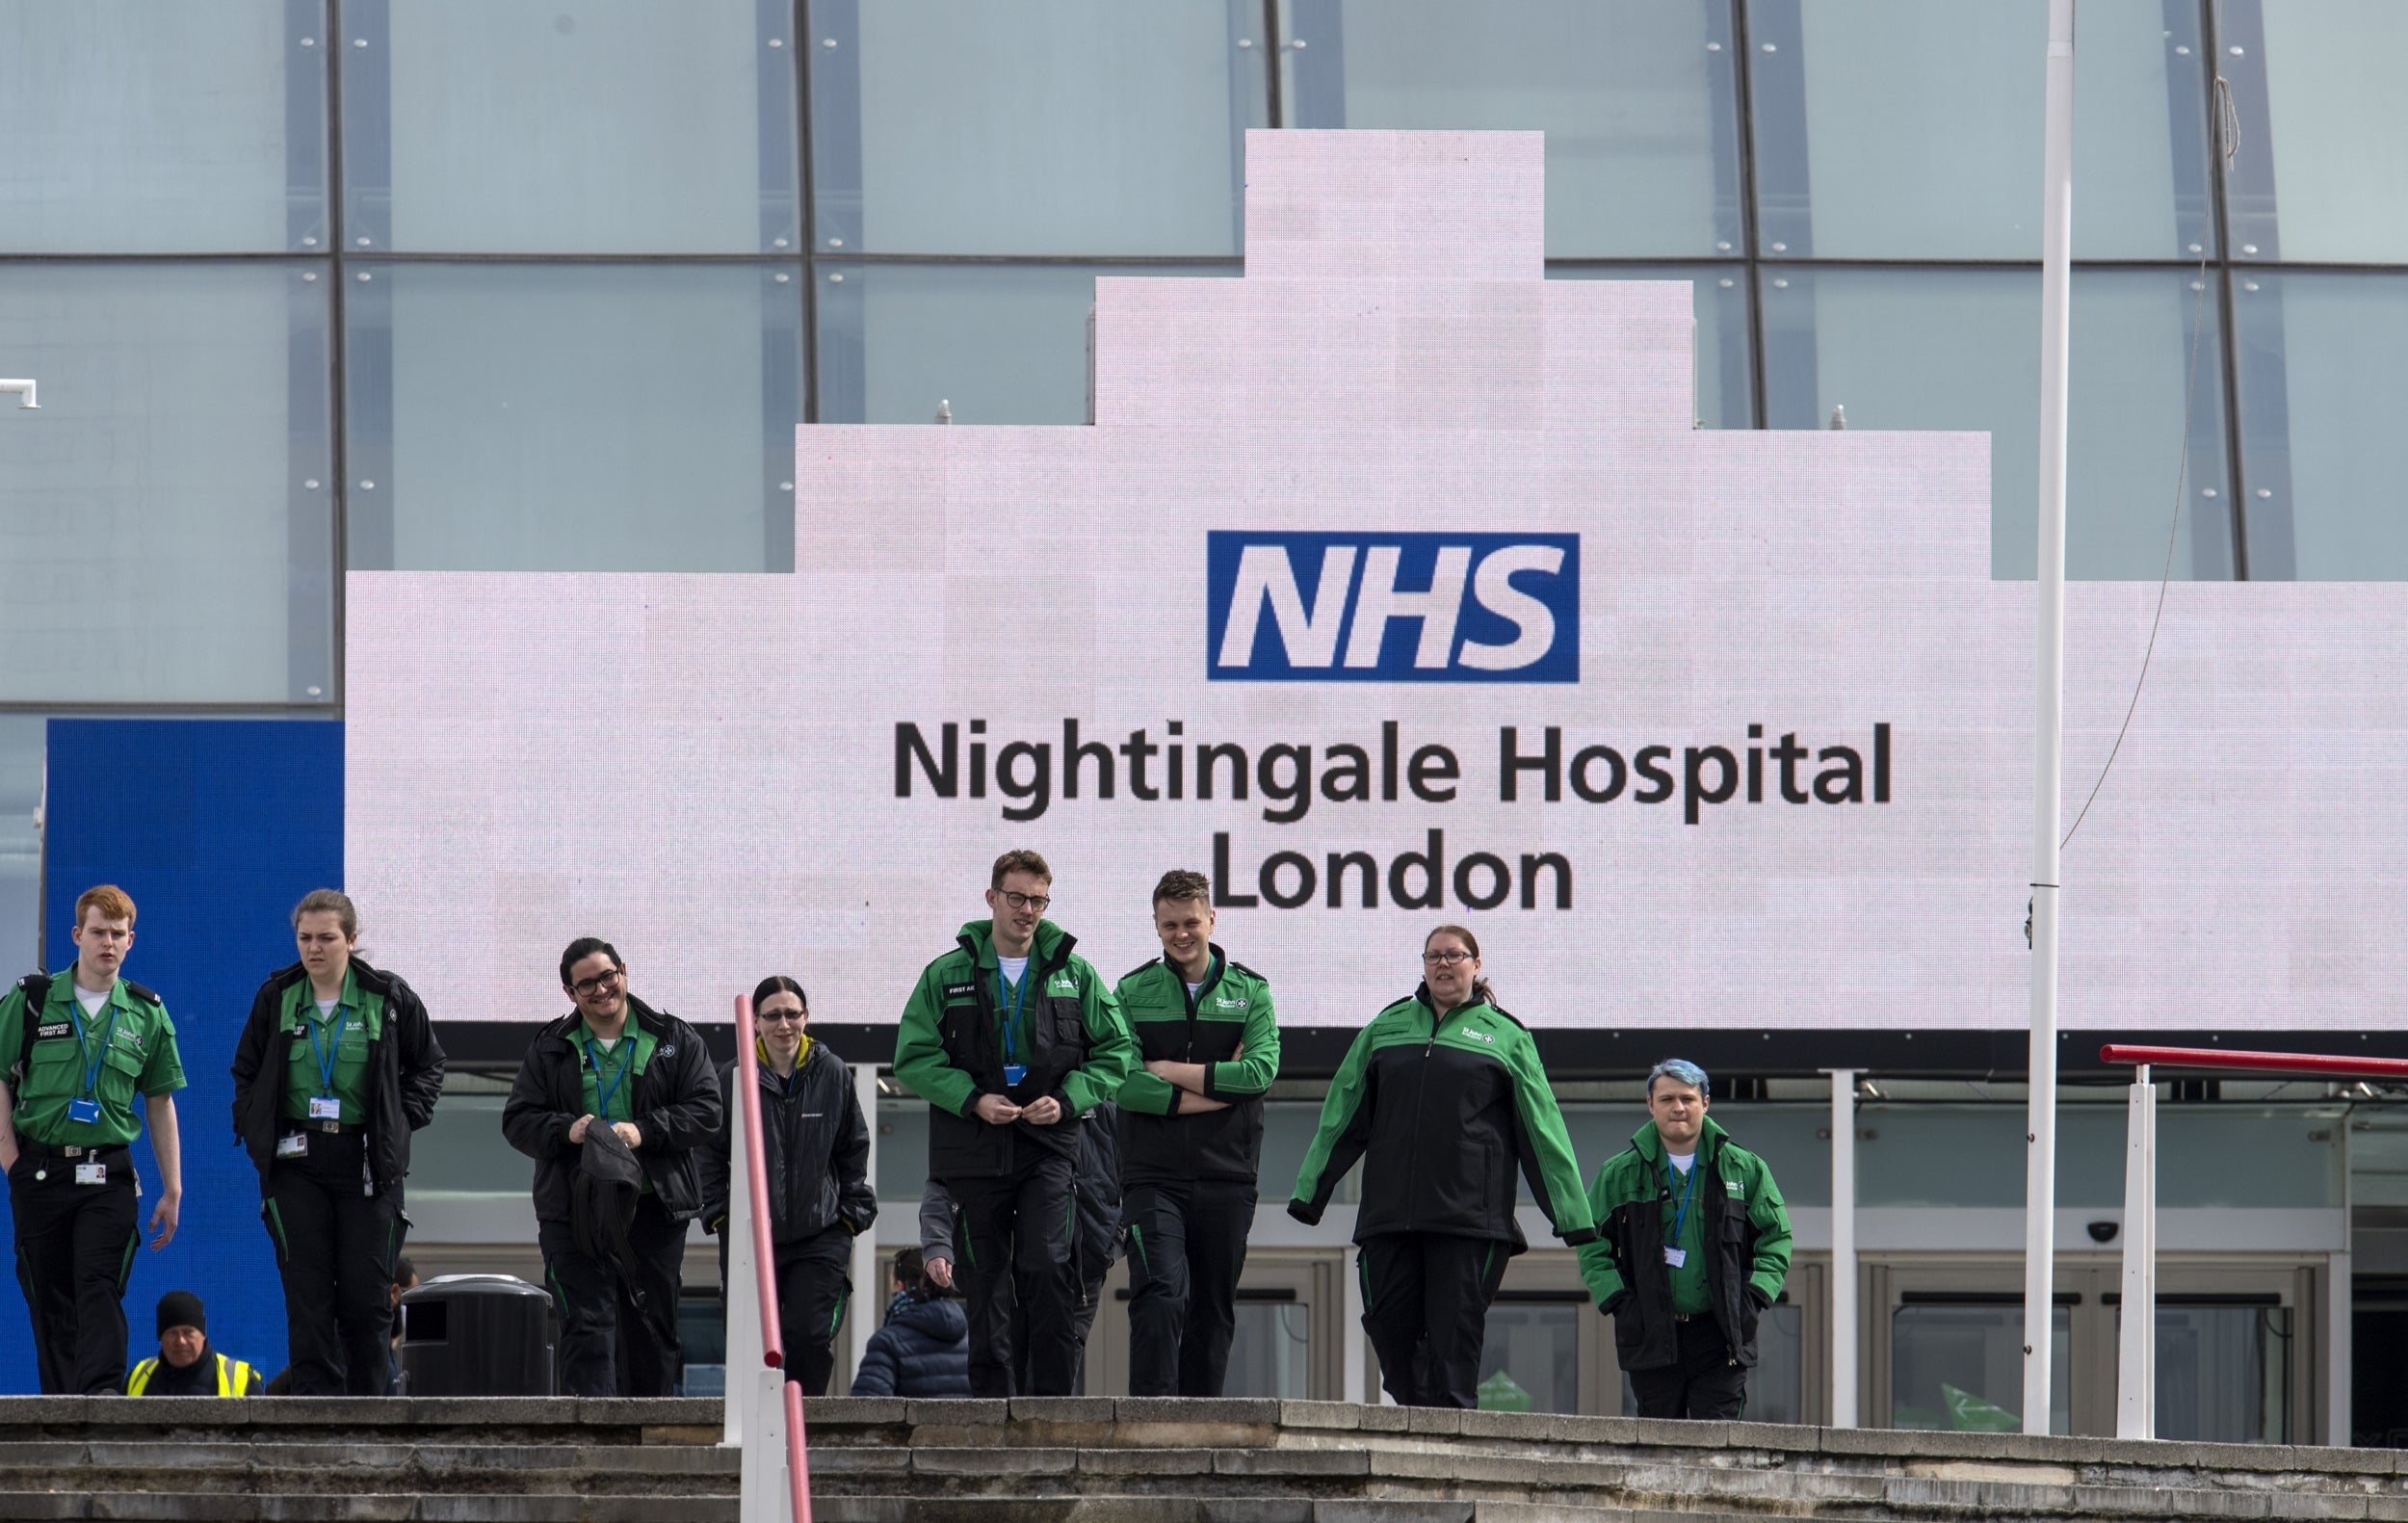 St Johns Ambulance staff leave the NHS Nightingale hospital at the Excel centre